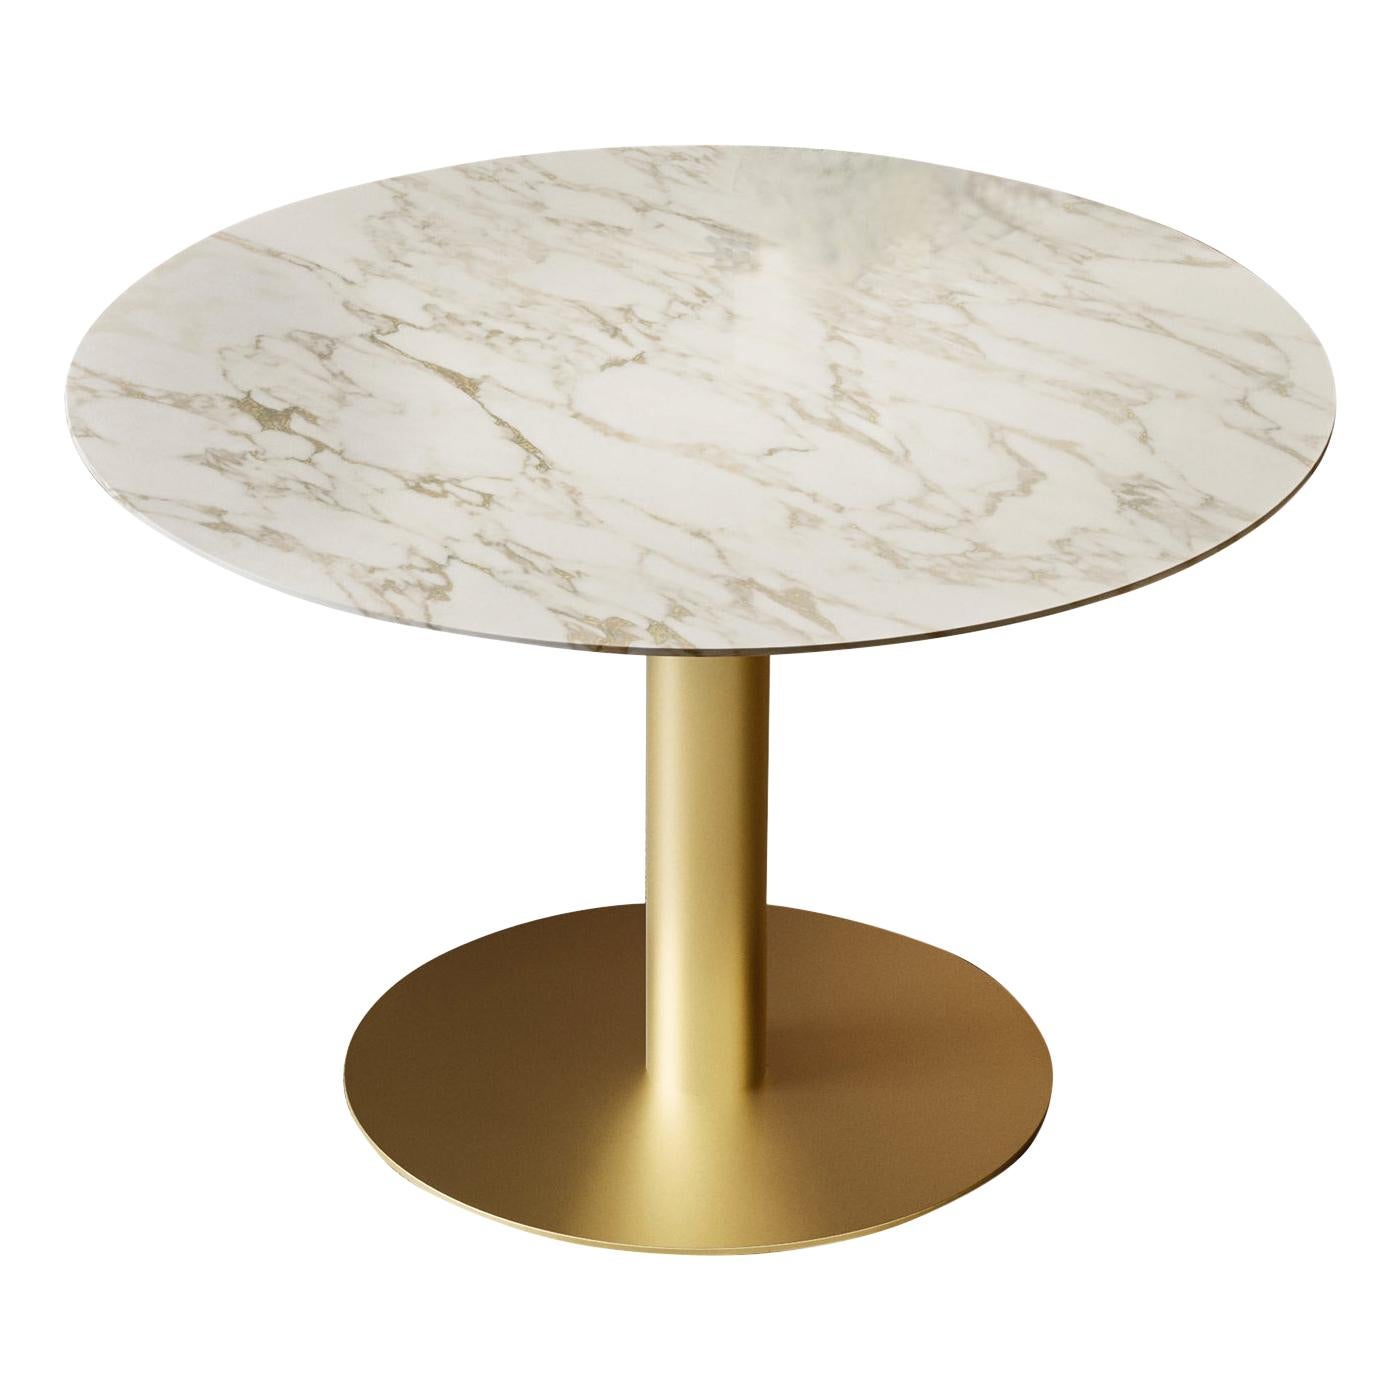 Block 2.0 Round Table with Calacatta Marble Top